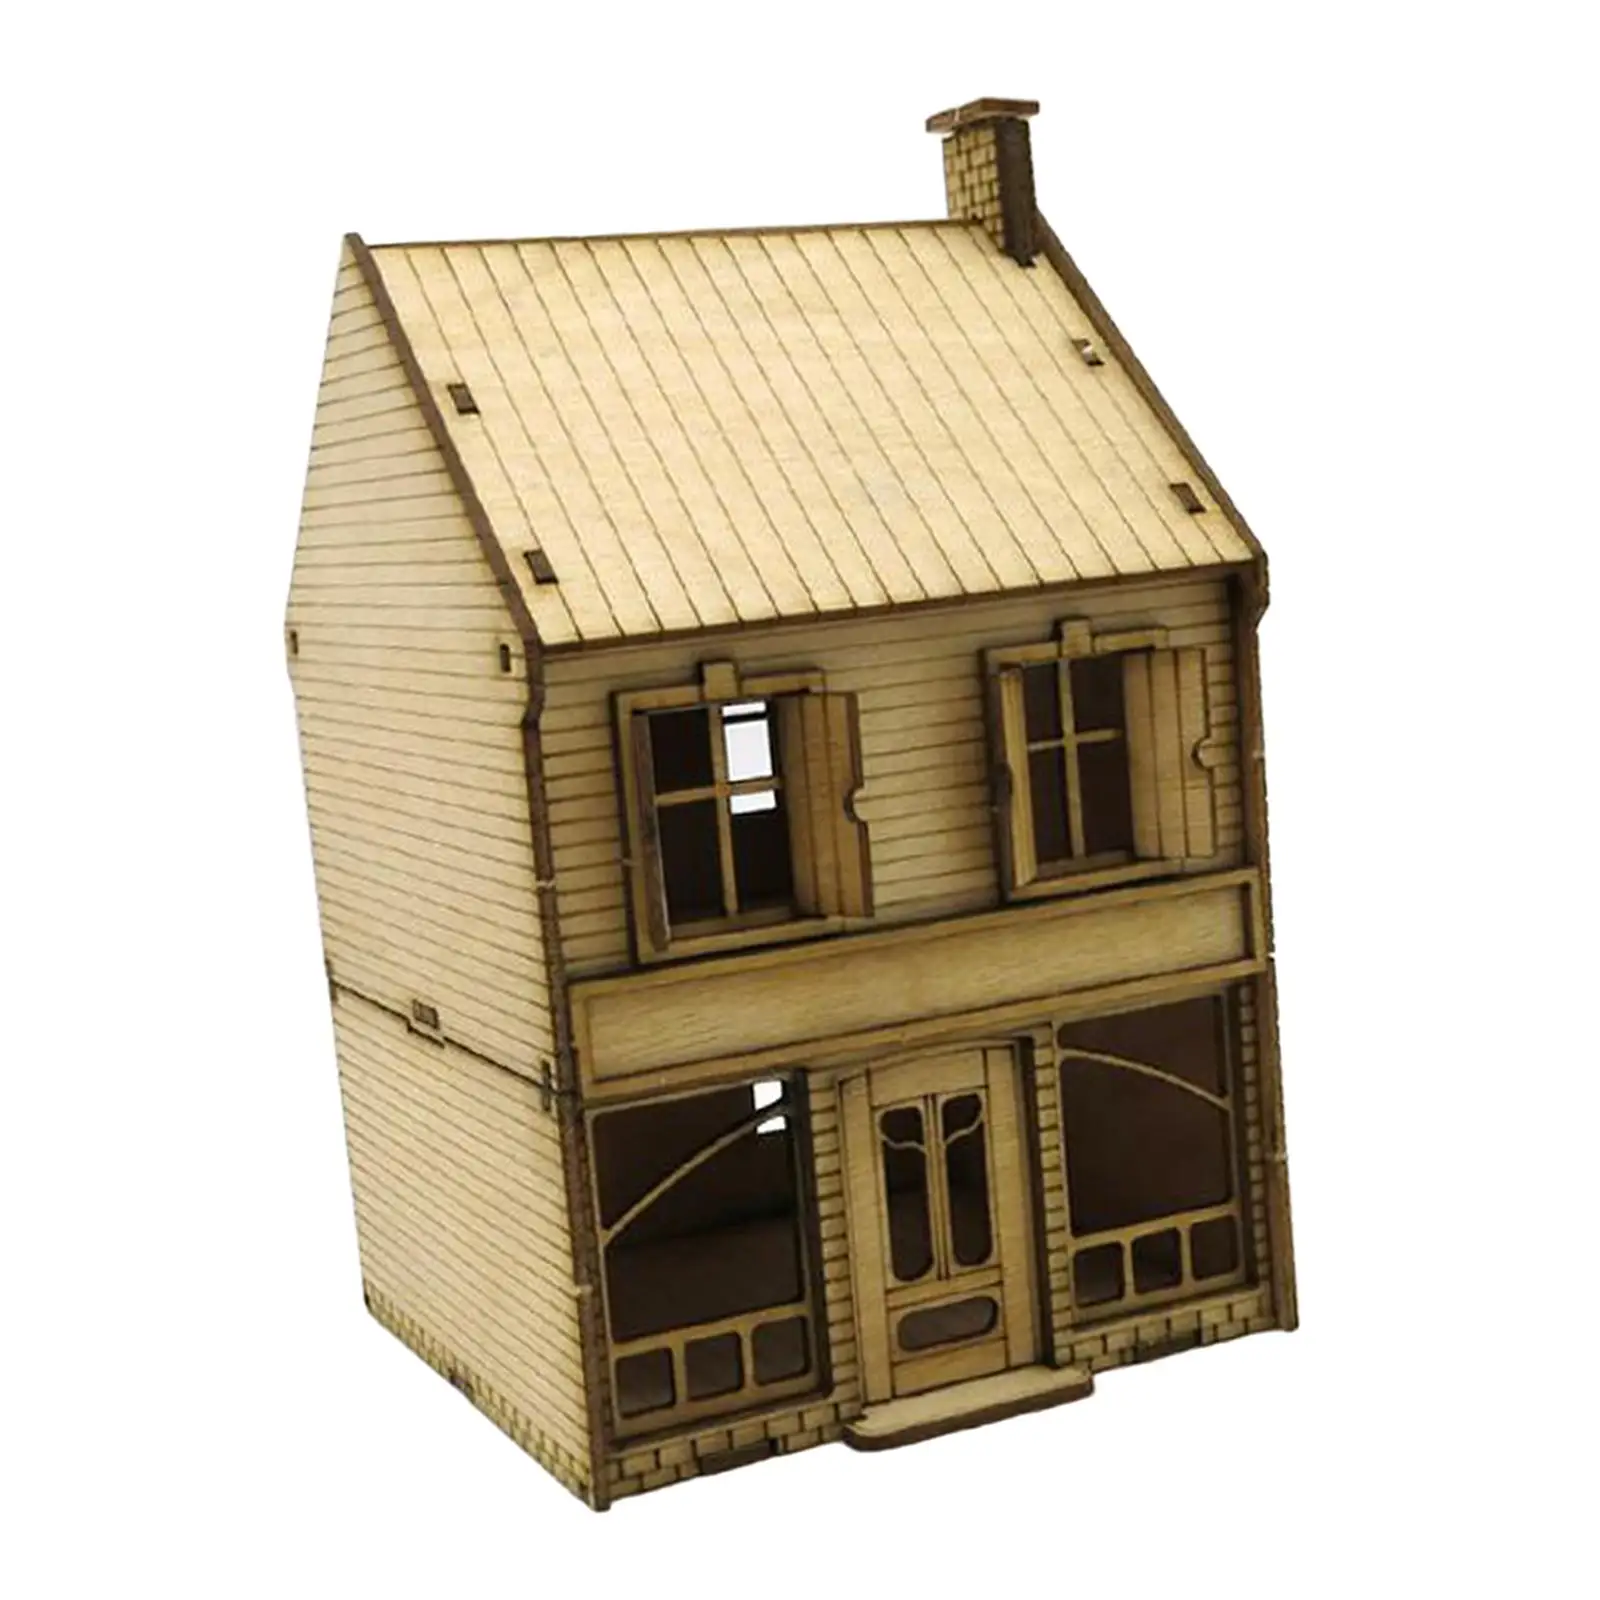 1/72 Wooden 2 Tier European House Puzzles Hobby Toys Layout Scenery for Diorama Sand Table Model Railway Accessory Decoration